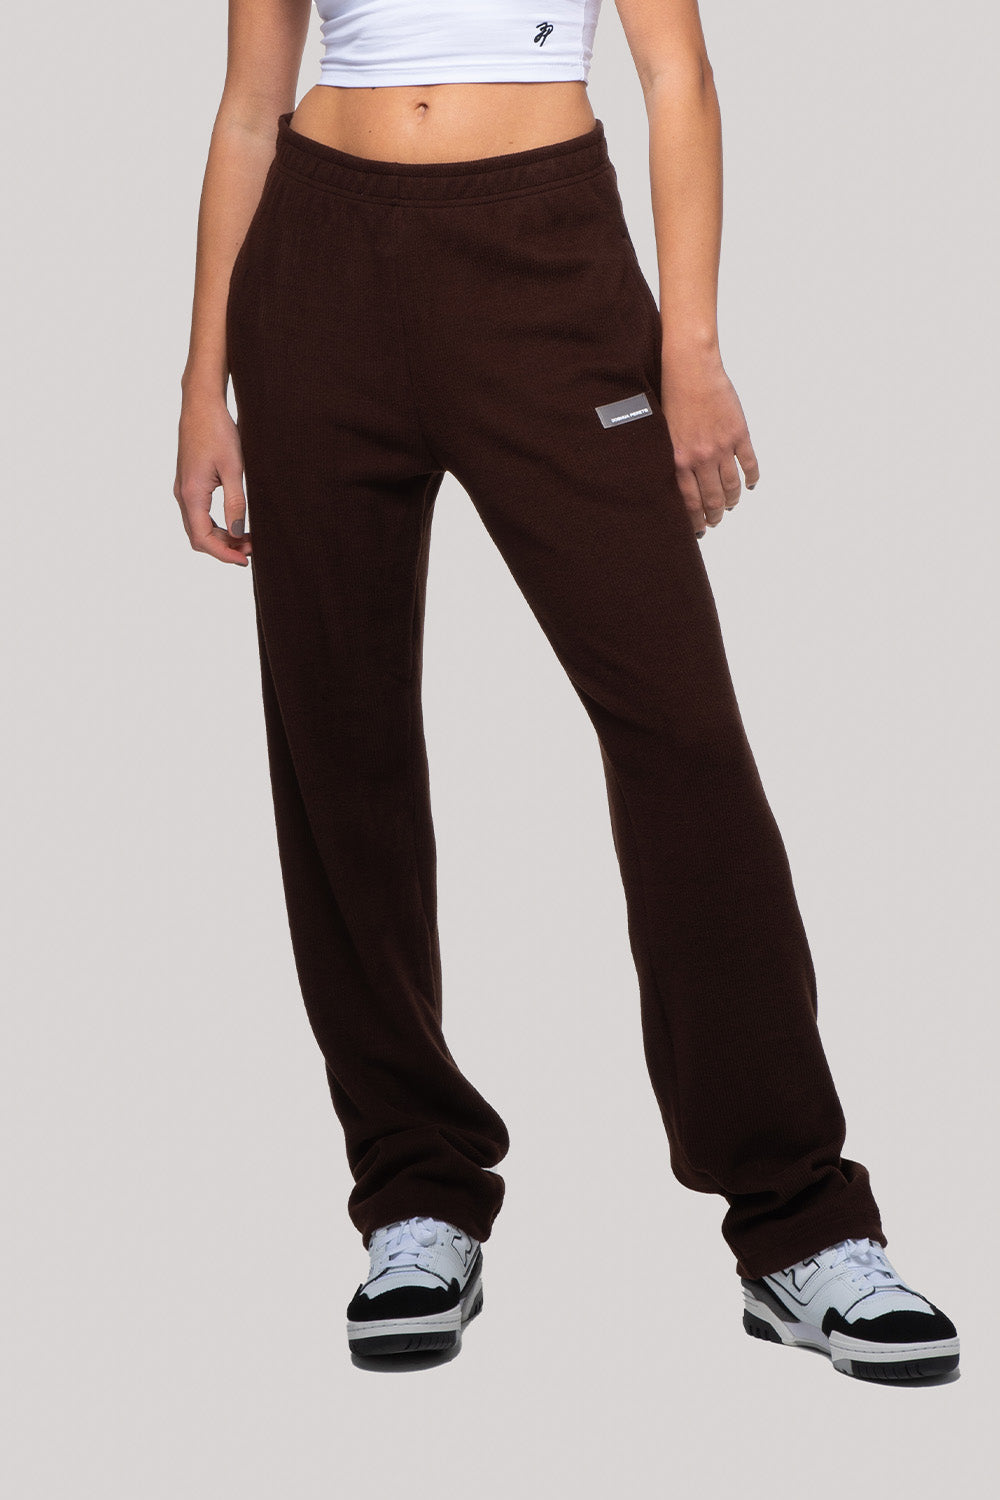 Ellien - Semi Fitted Pant